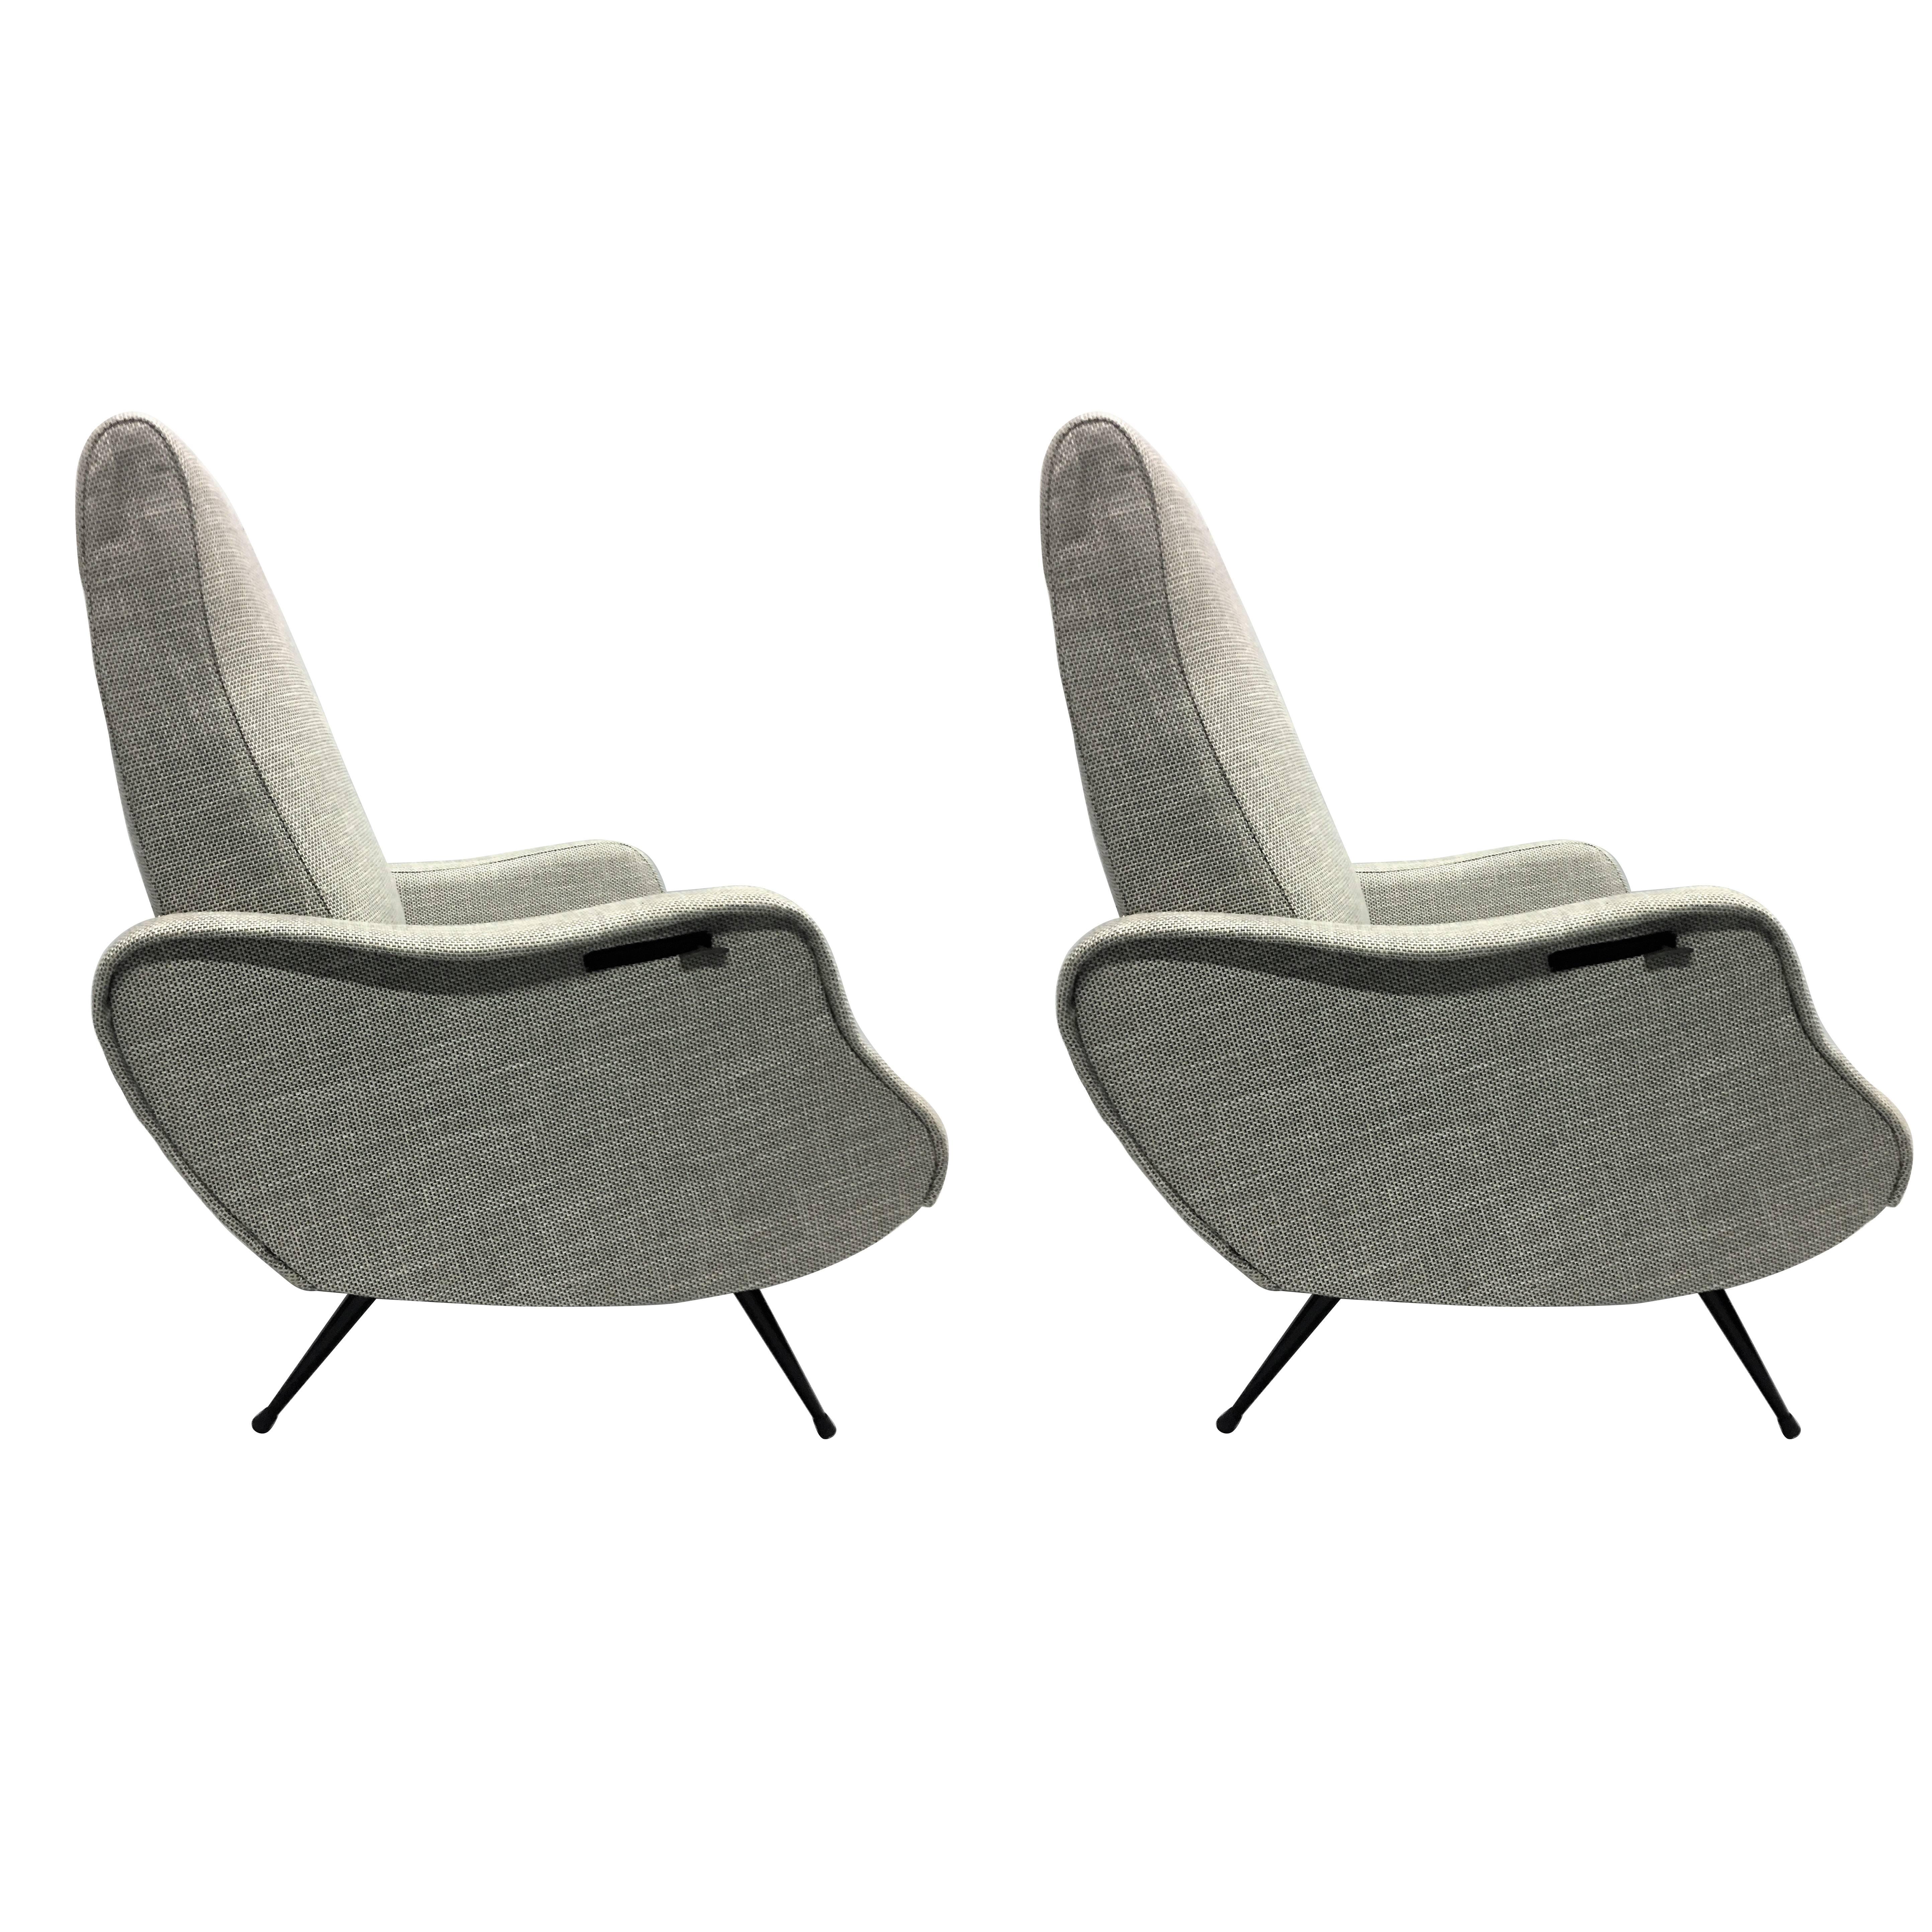 Pair Mid-Century Modern Lounge Chairs / Recliners Style Marco Zanuso,  Italy,1950